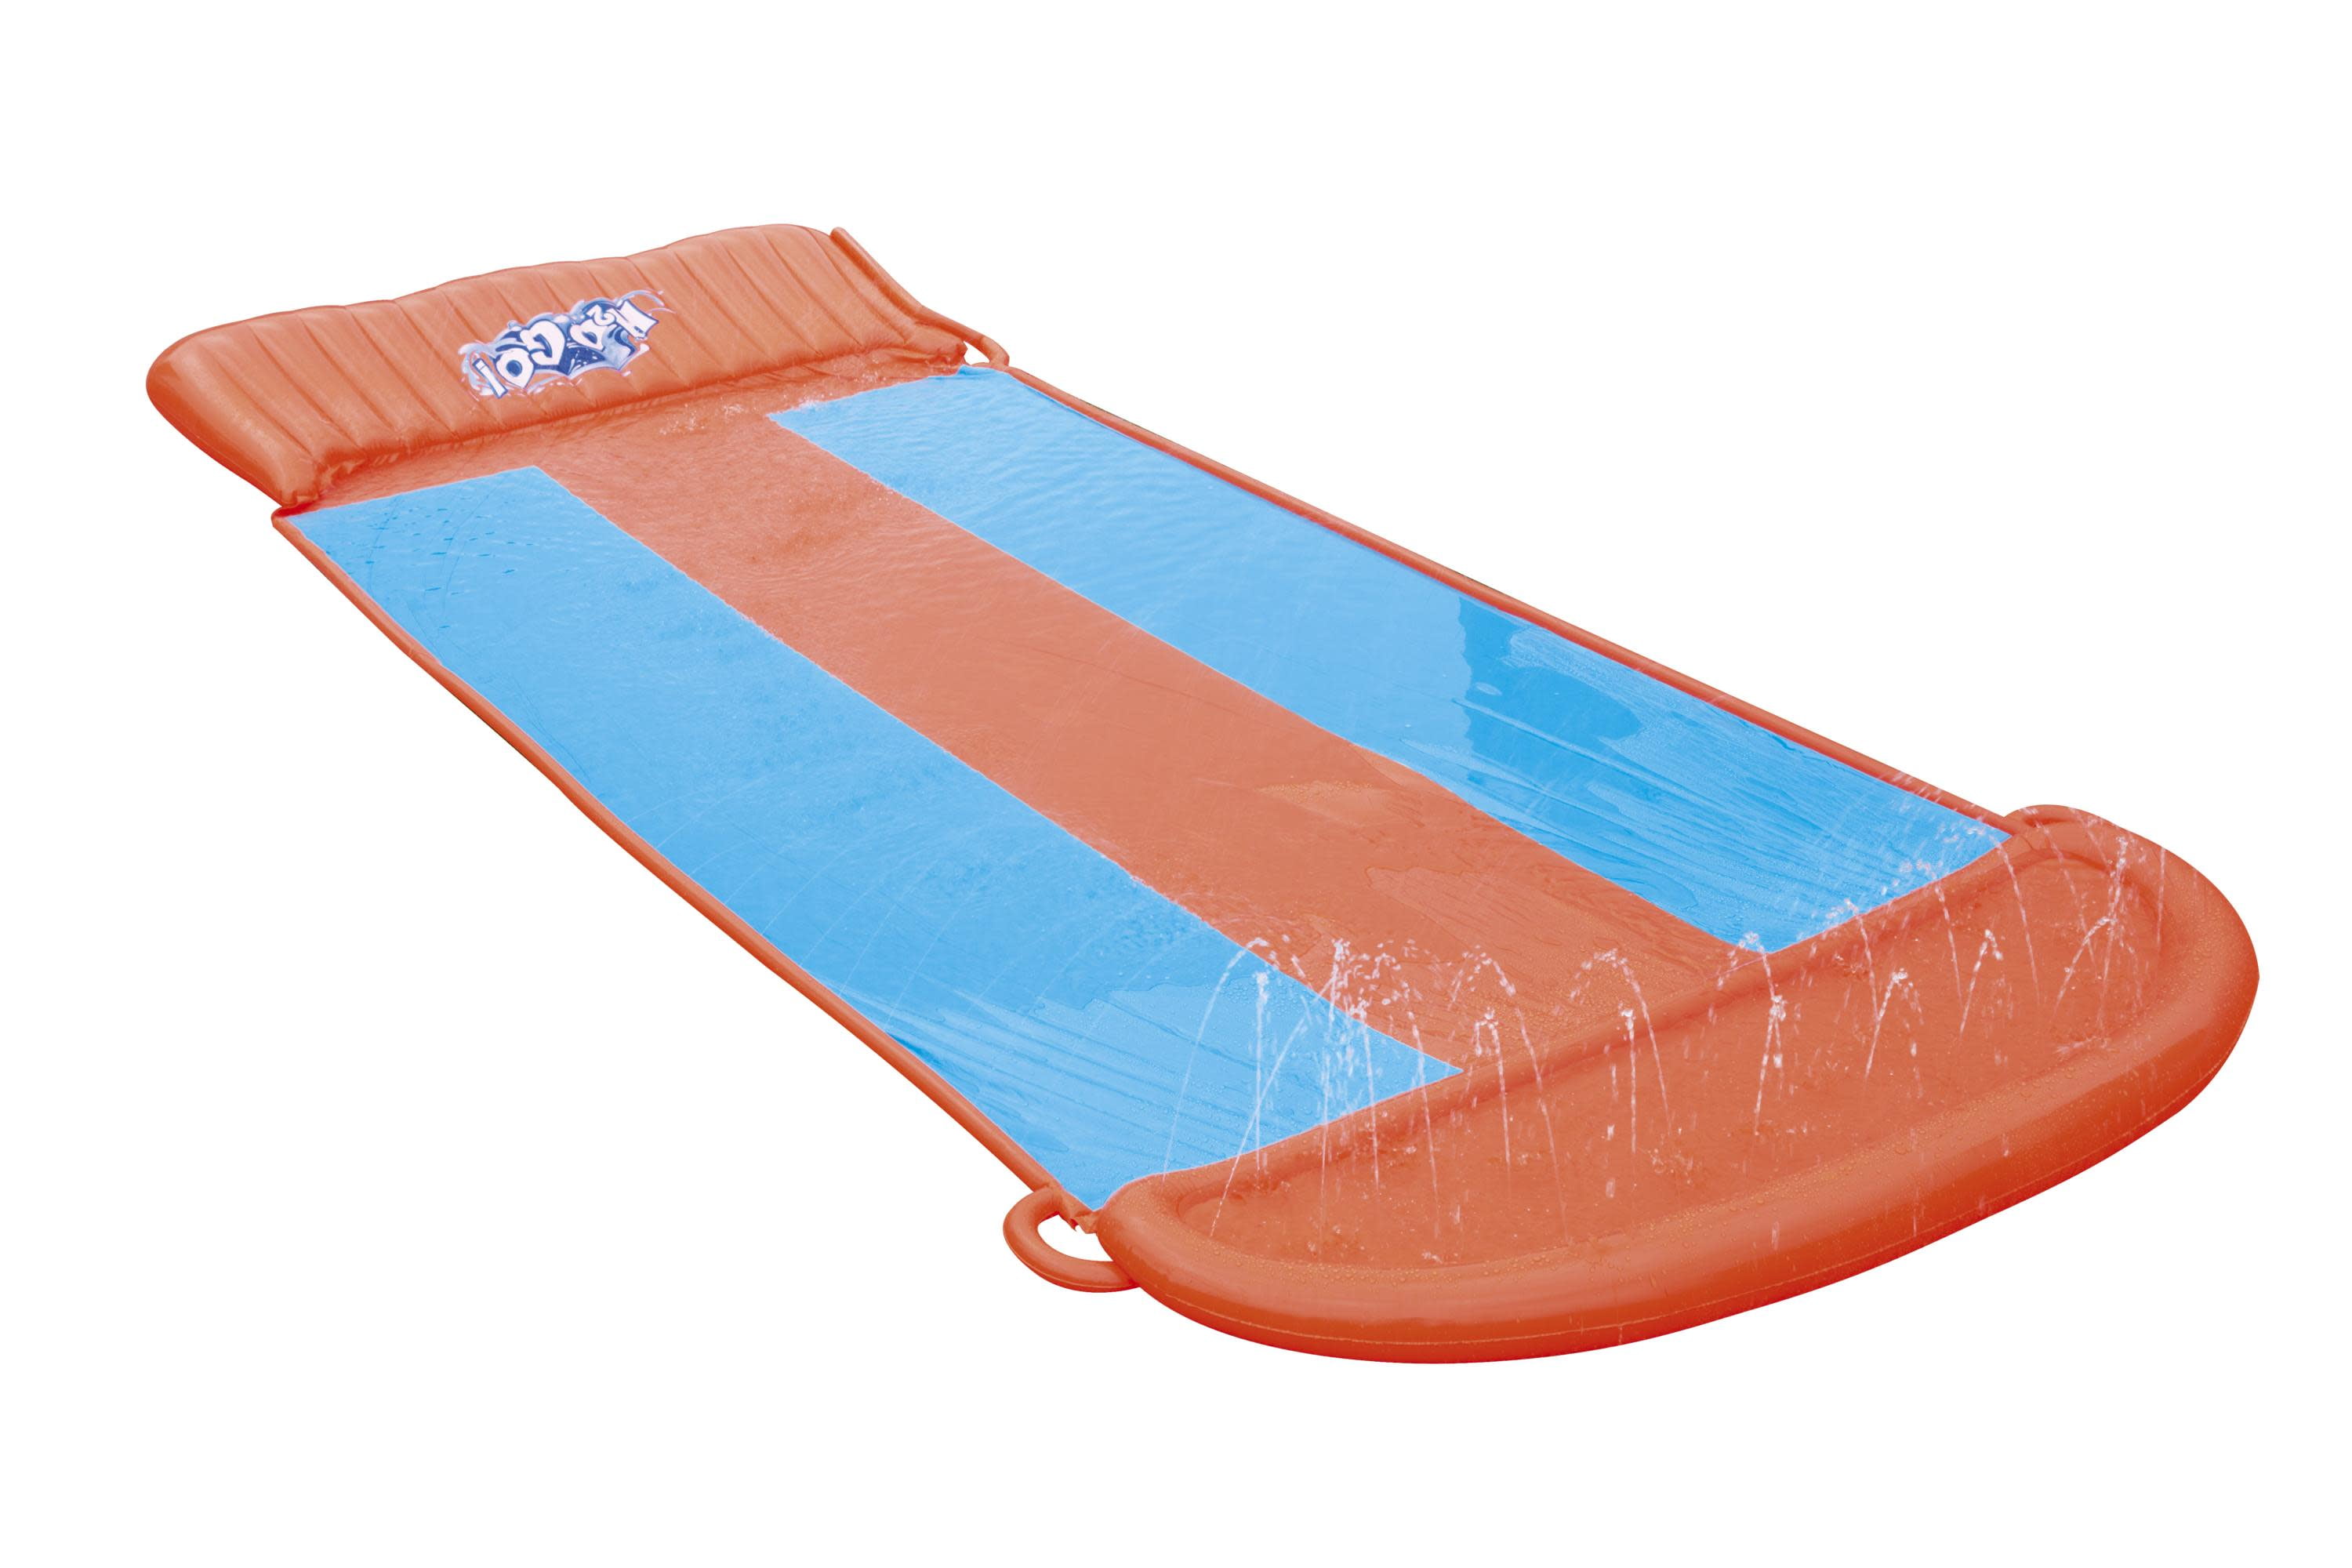 Triple Lane Water Slide With Speed Ramp And Built-In Sprinklers H2O-GO 